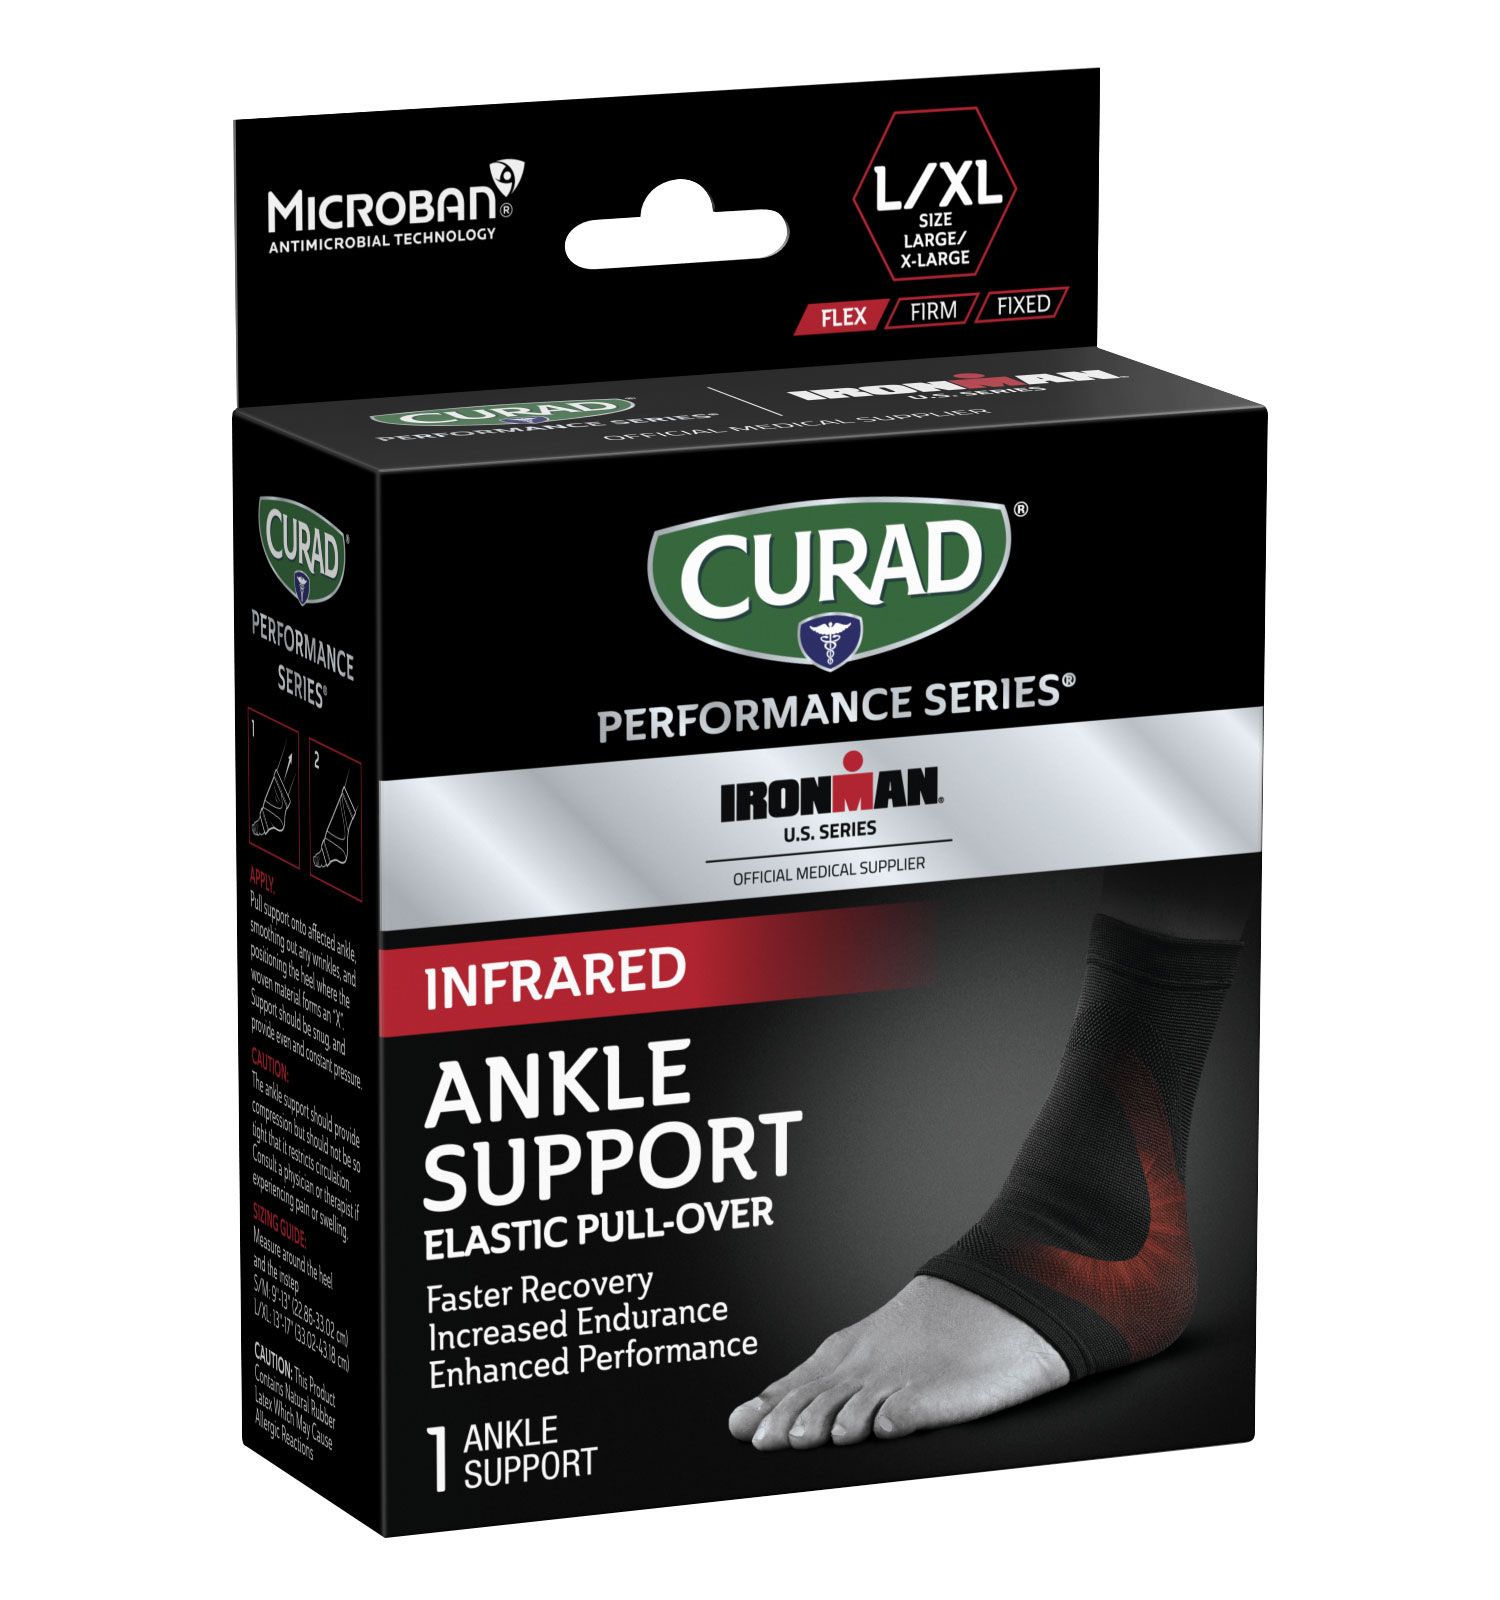 CURAD Performance Series IRONMAN Infrared Ankle Support, Elastic, Large ...